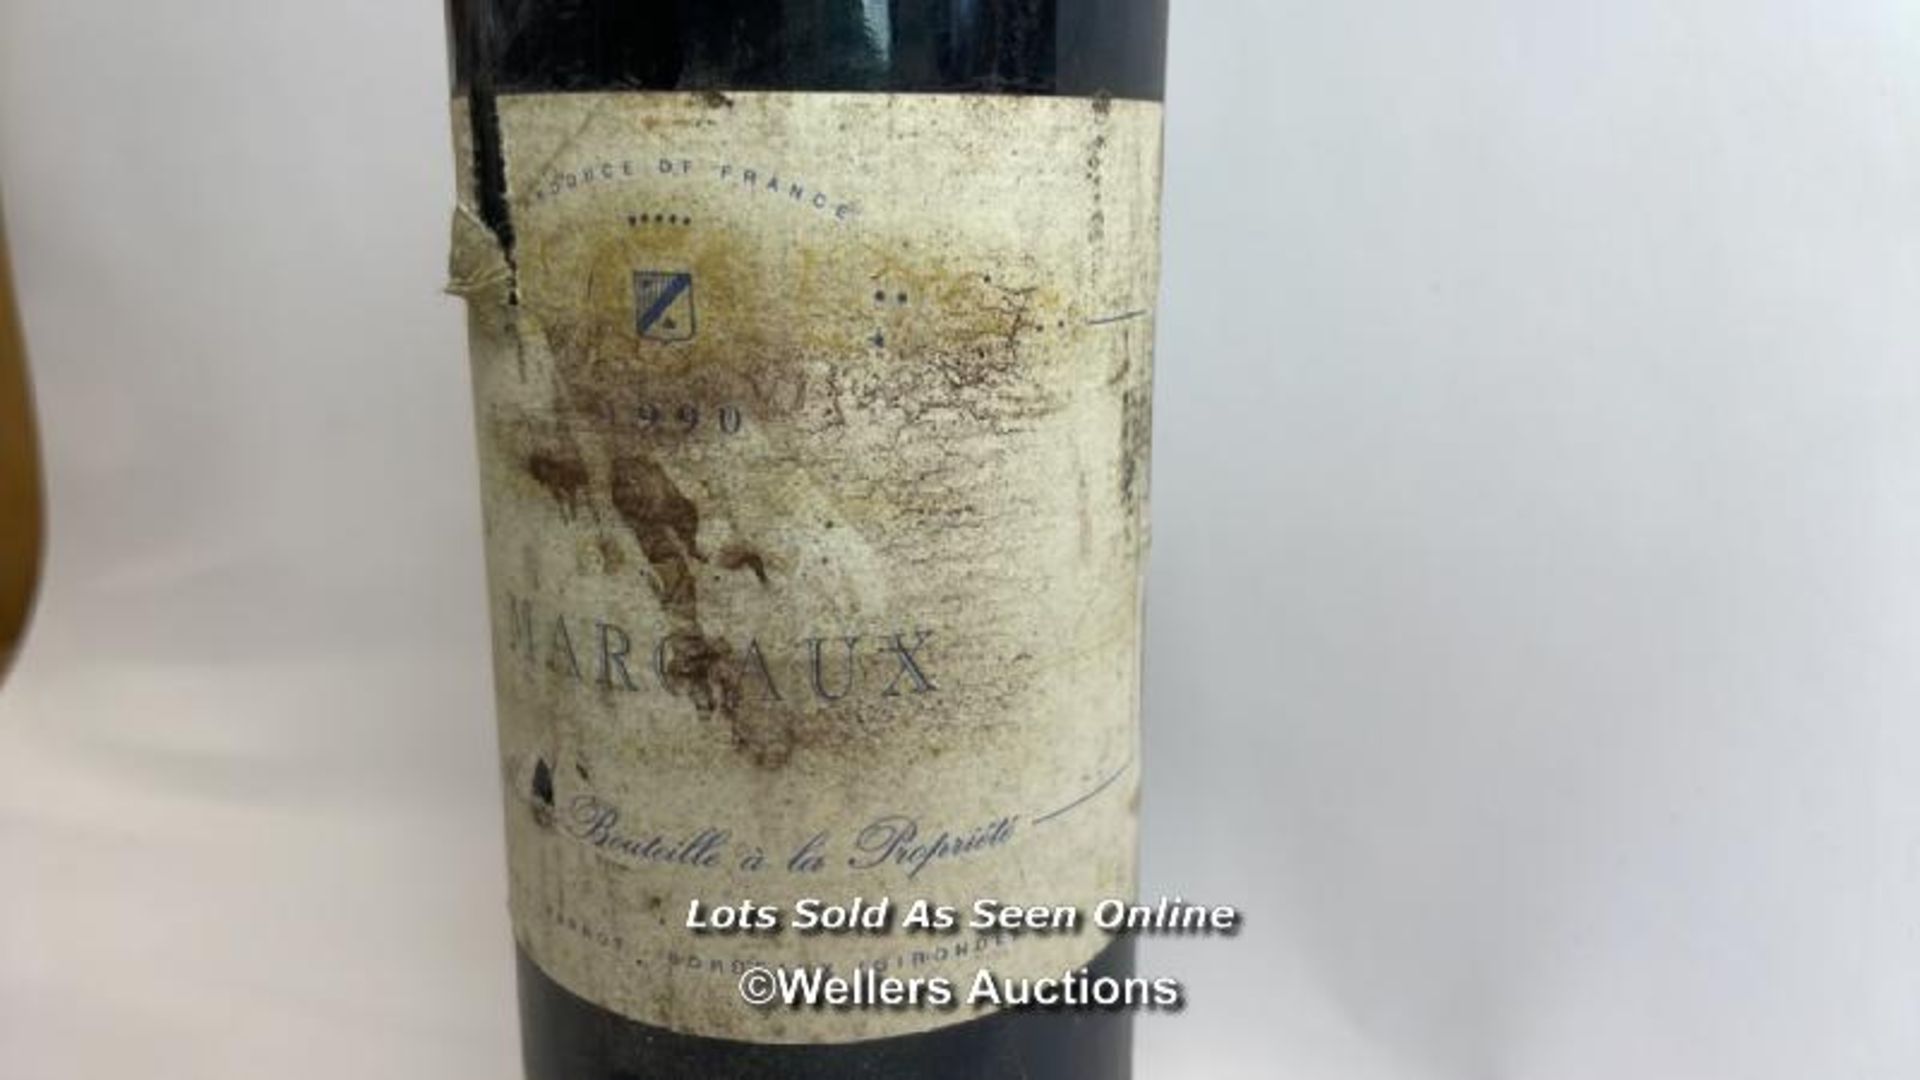 1990 Margaux Par E Parrot Bordeaux (Gironde), 75cl, 12% vol / Please see images for fill level and - Image 7 of 12